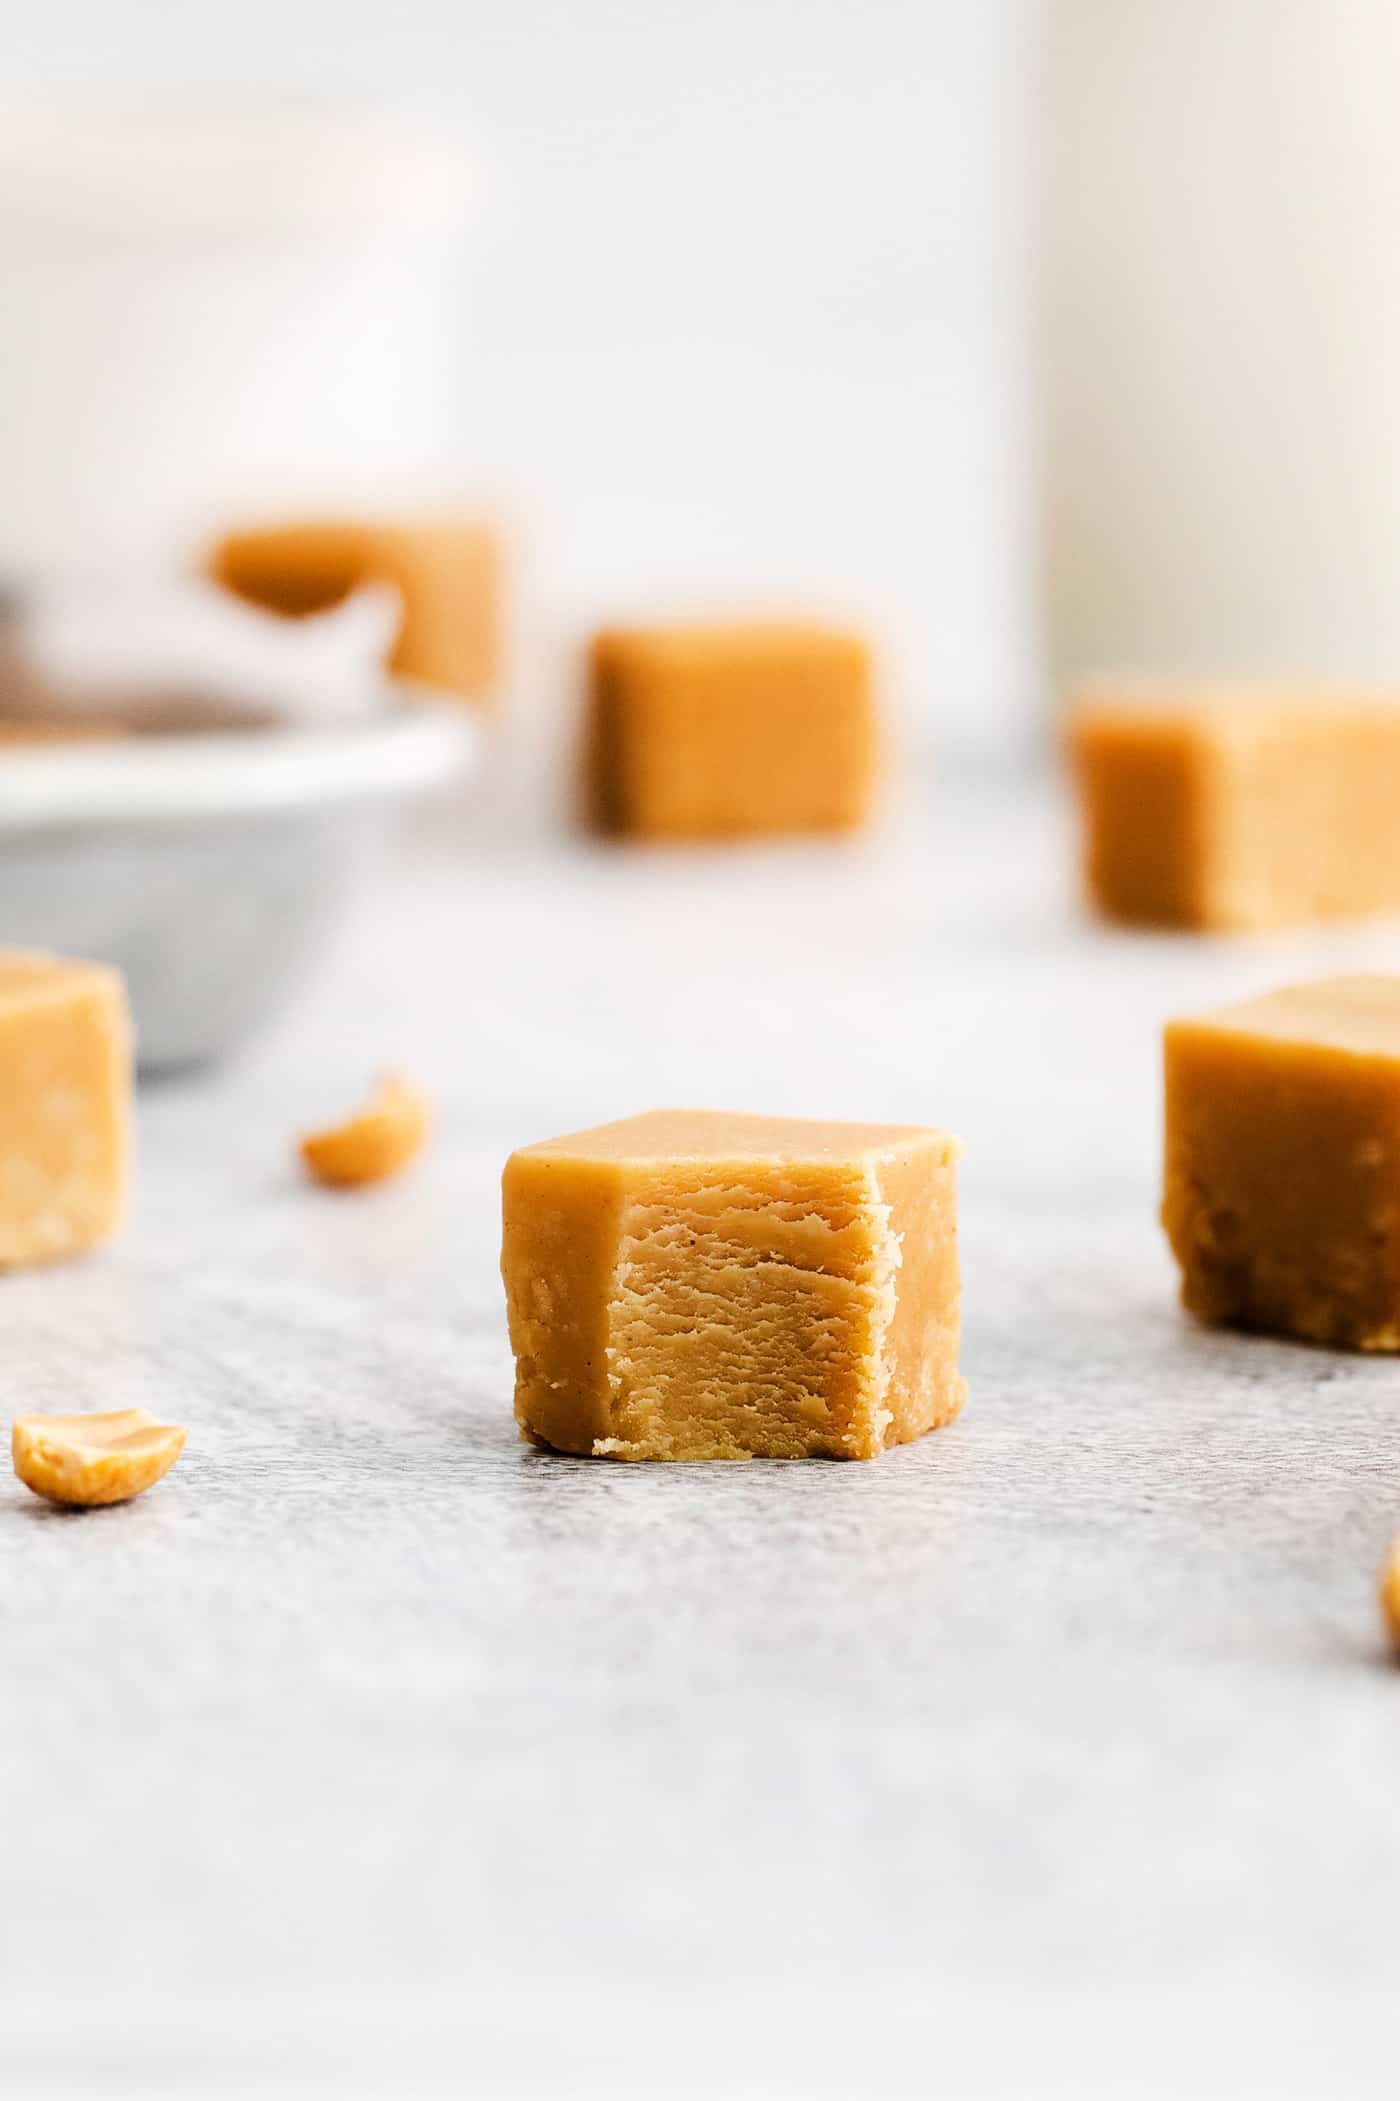 A side view of a piece of fudge with a bite missing